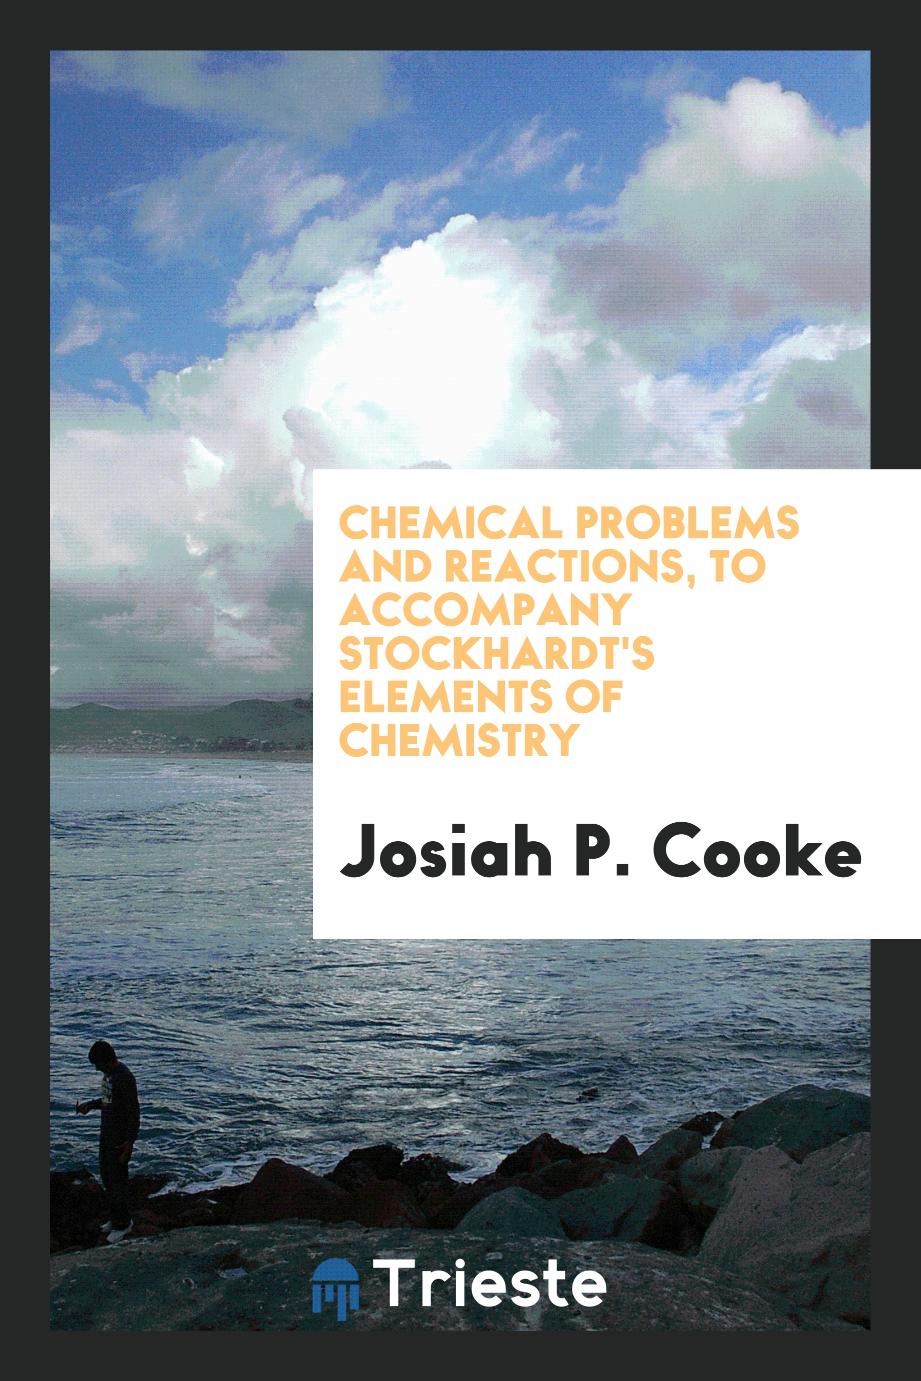 Chemical Problems and Reactions, to Accompany Stockhardt's Elements of Chemistry